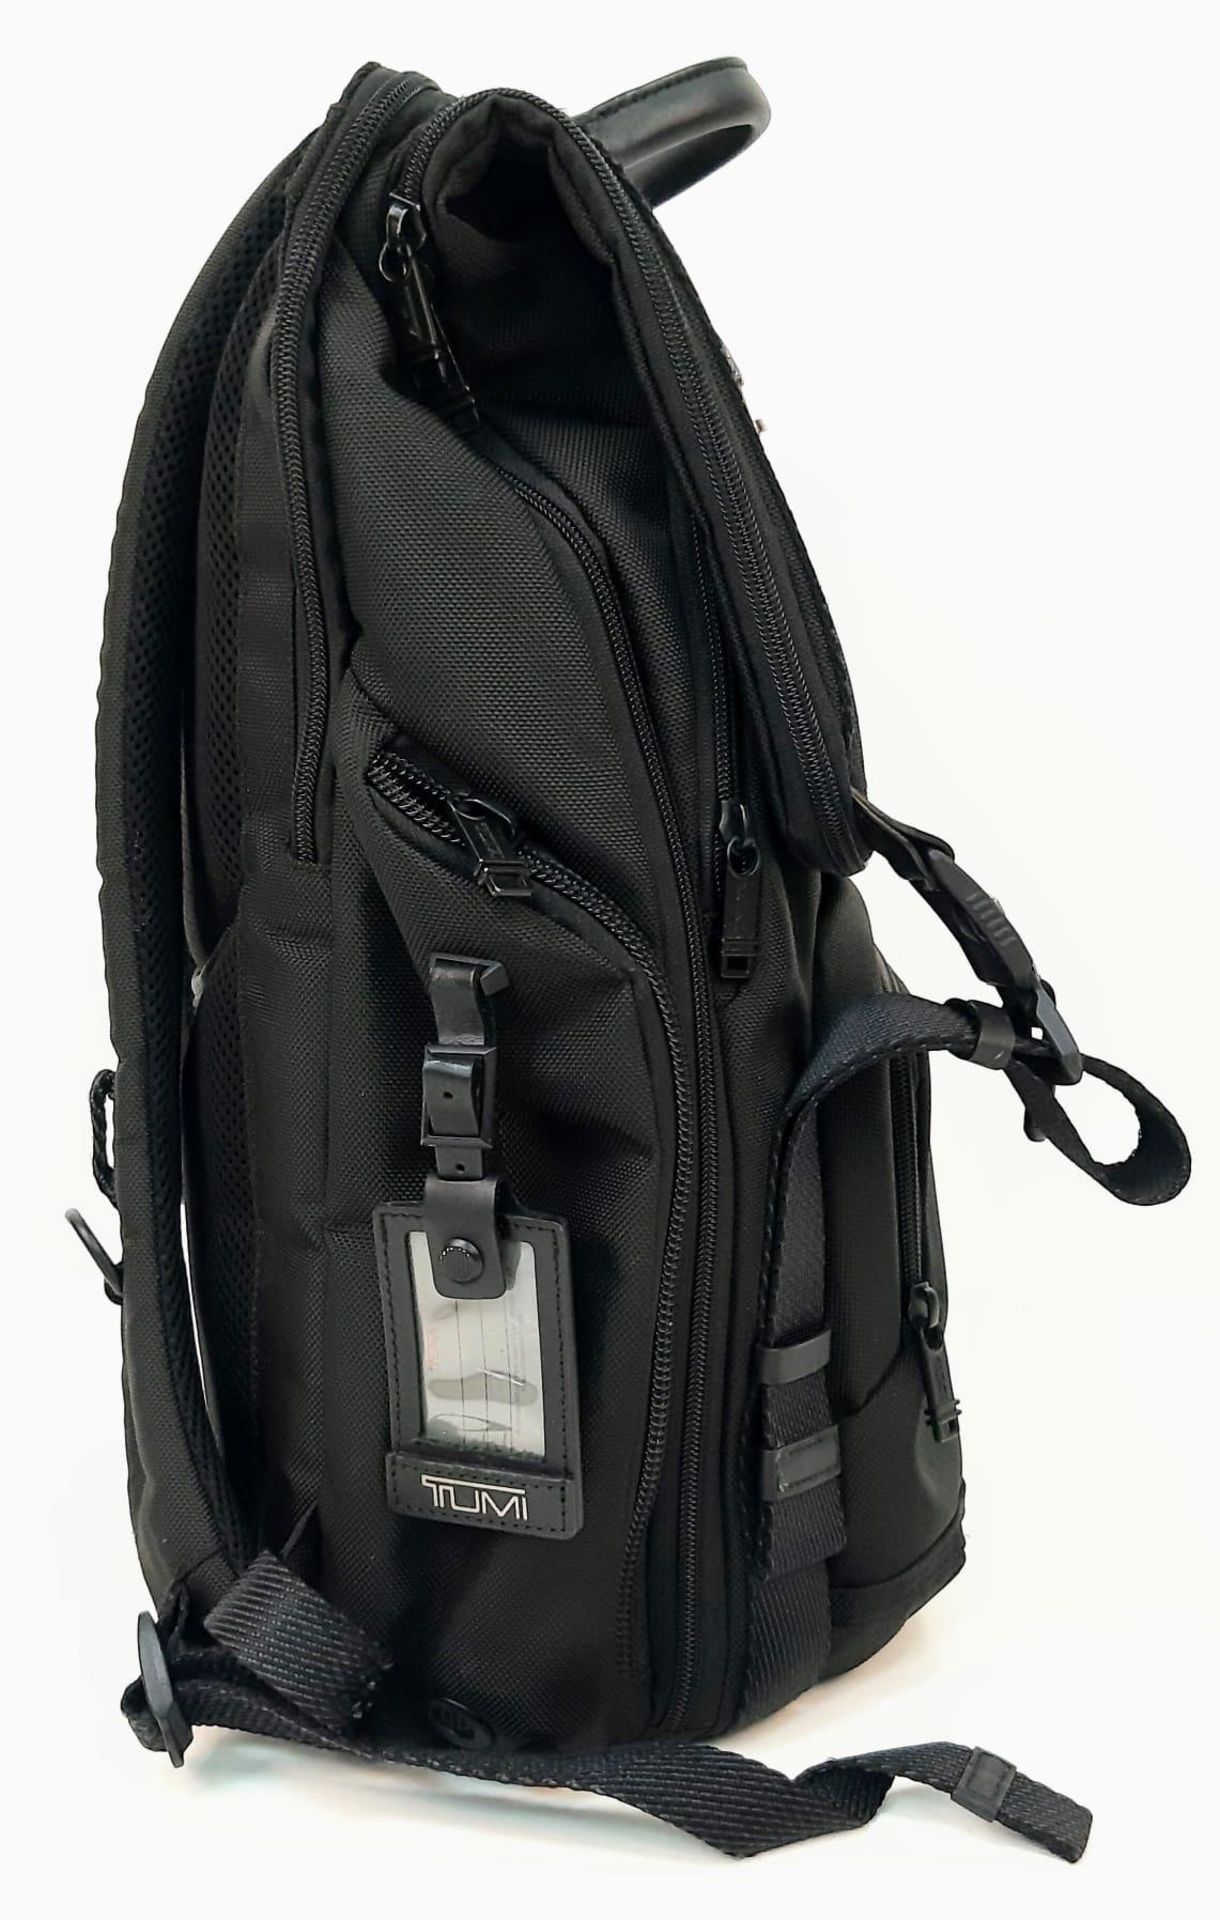 A TUMI Lark Black Backpack, 23L Capacity, Pockets for 16" Laptop, Tablet, Phone and Water Bottle. - Image 4 of 6